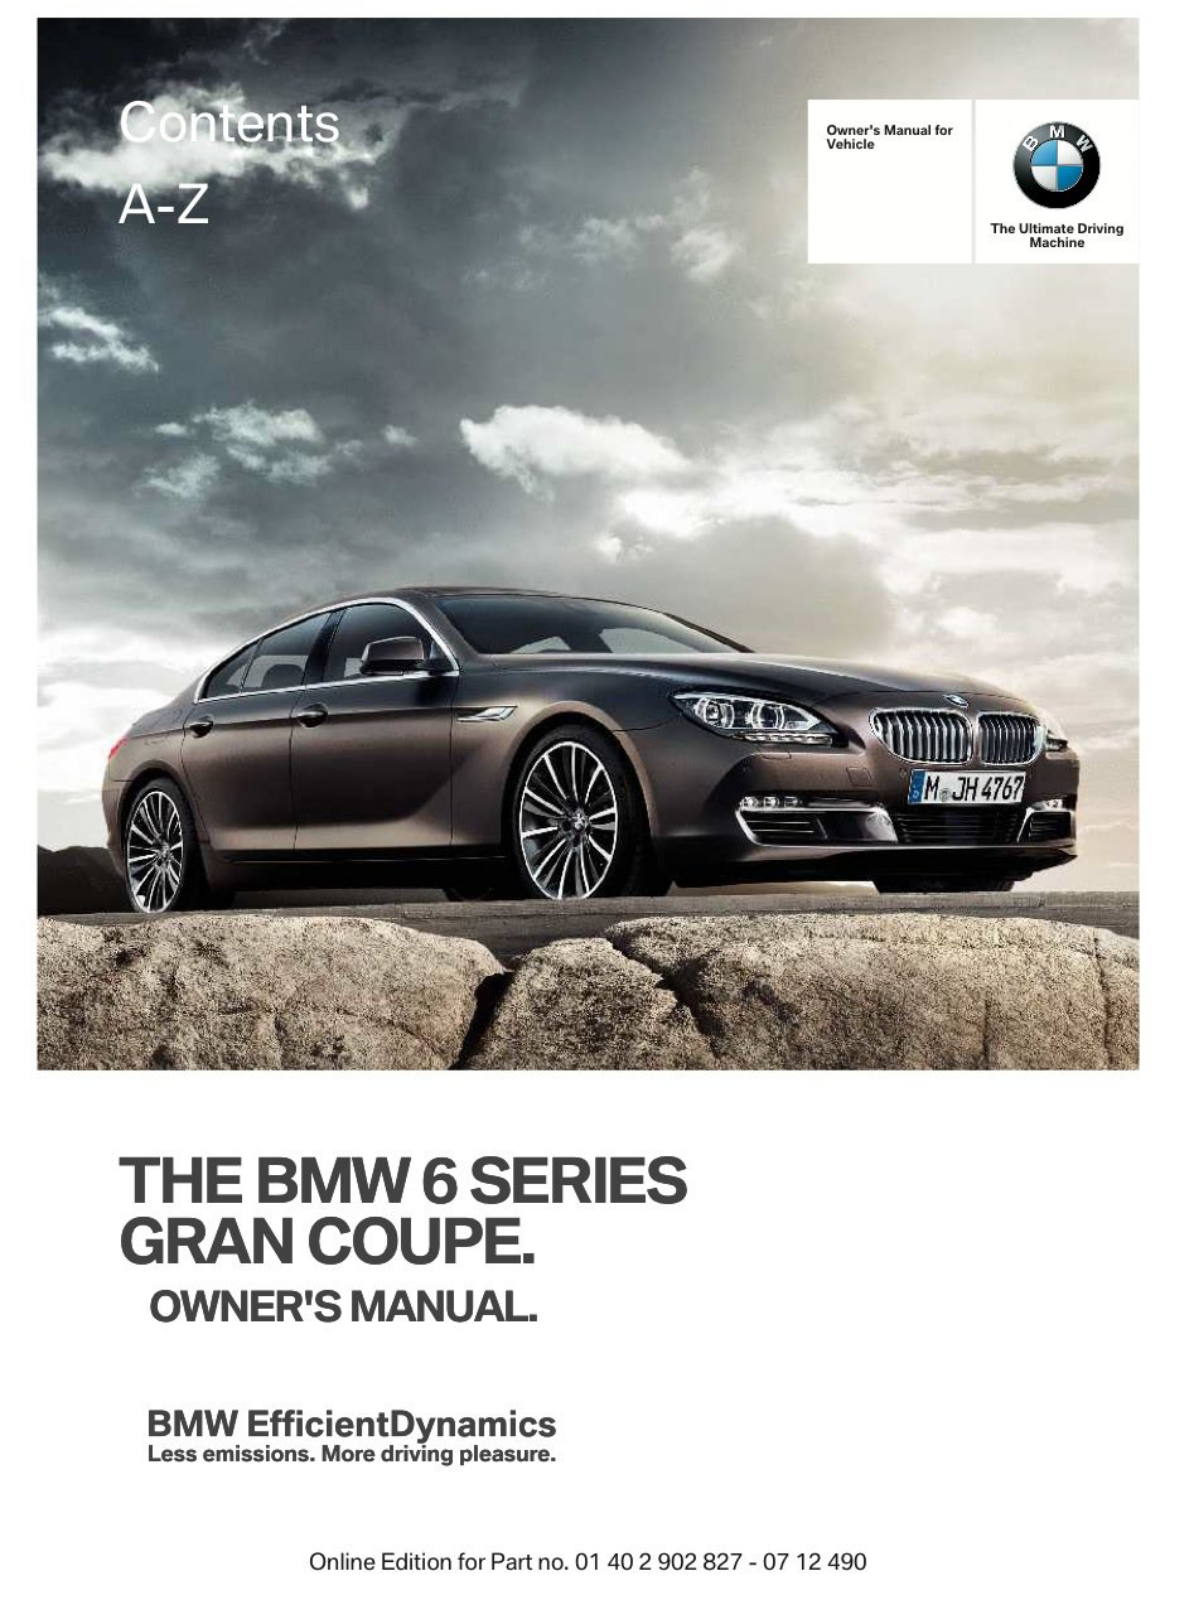 BMW 650i Gran Coupe 2013 Owner's Manual